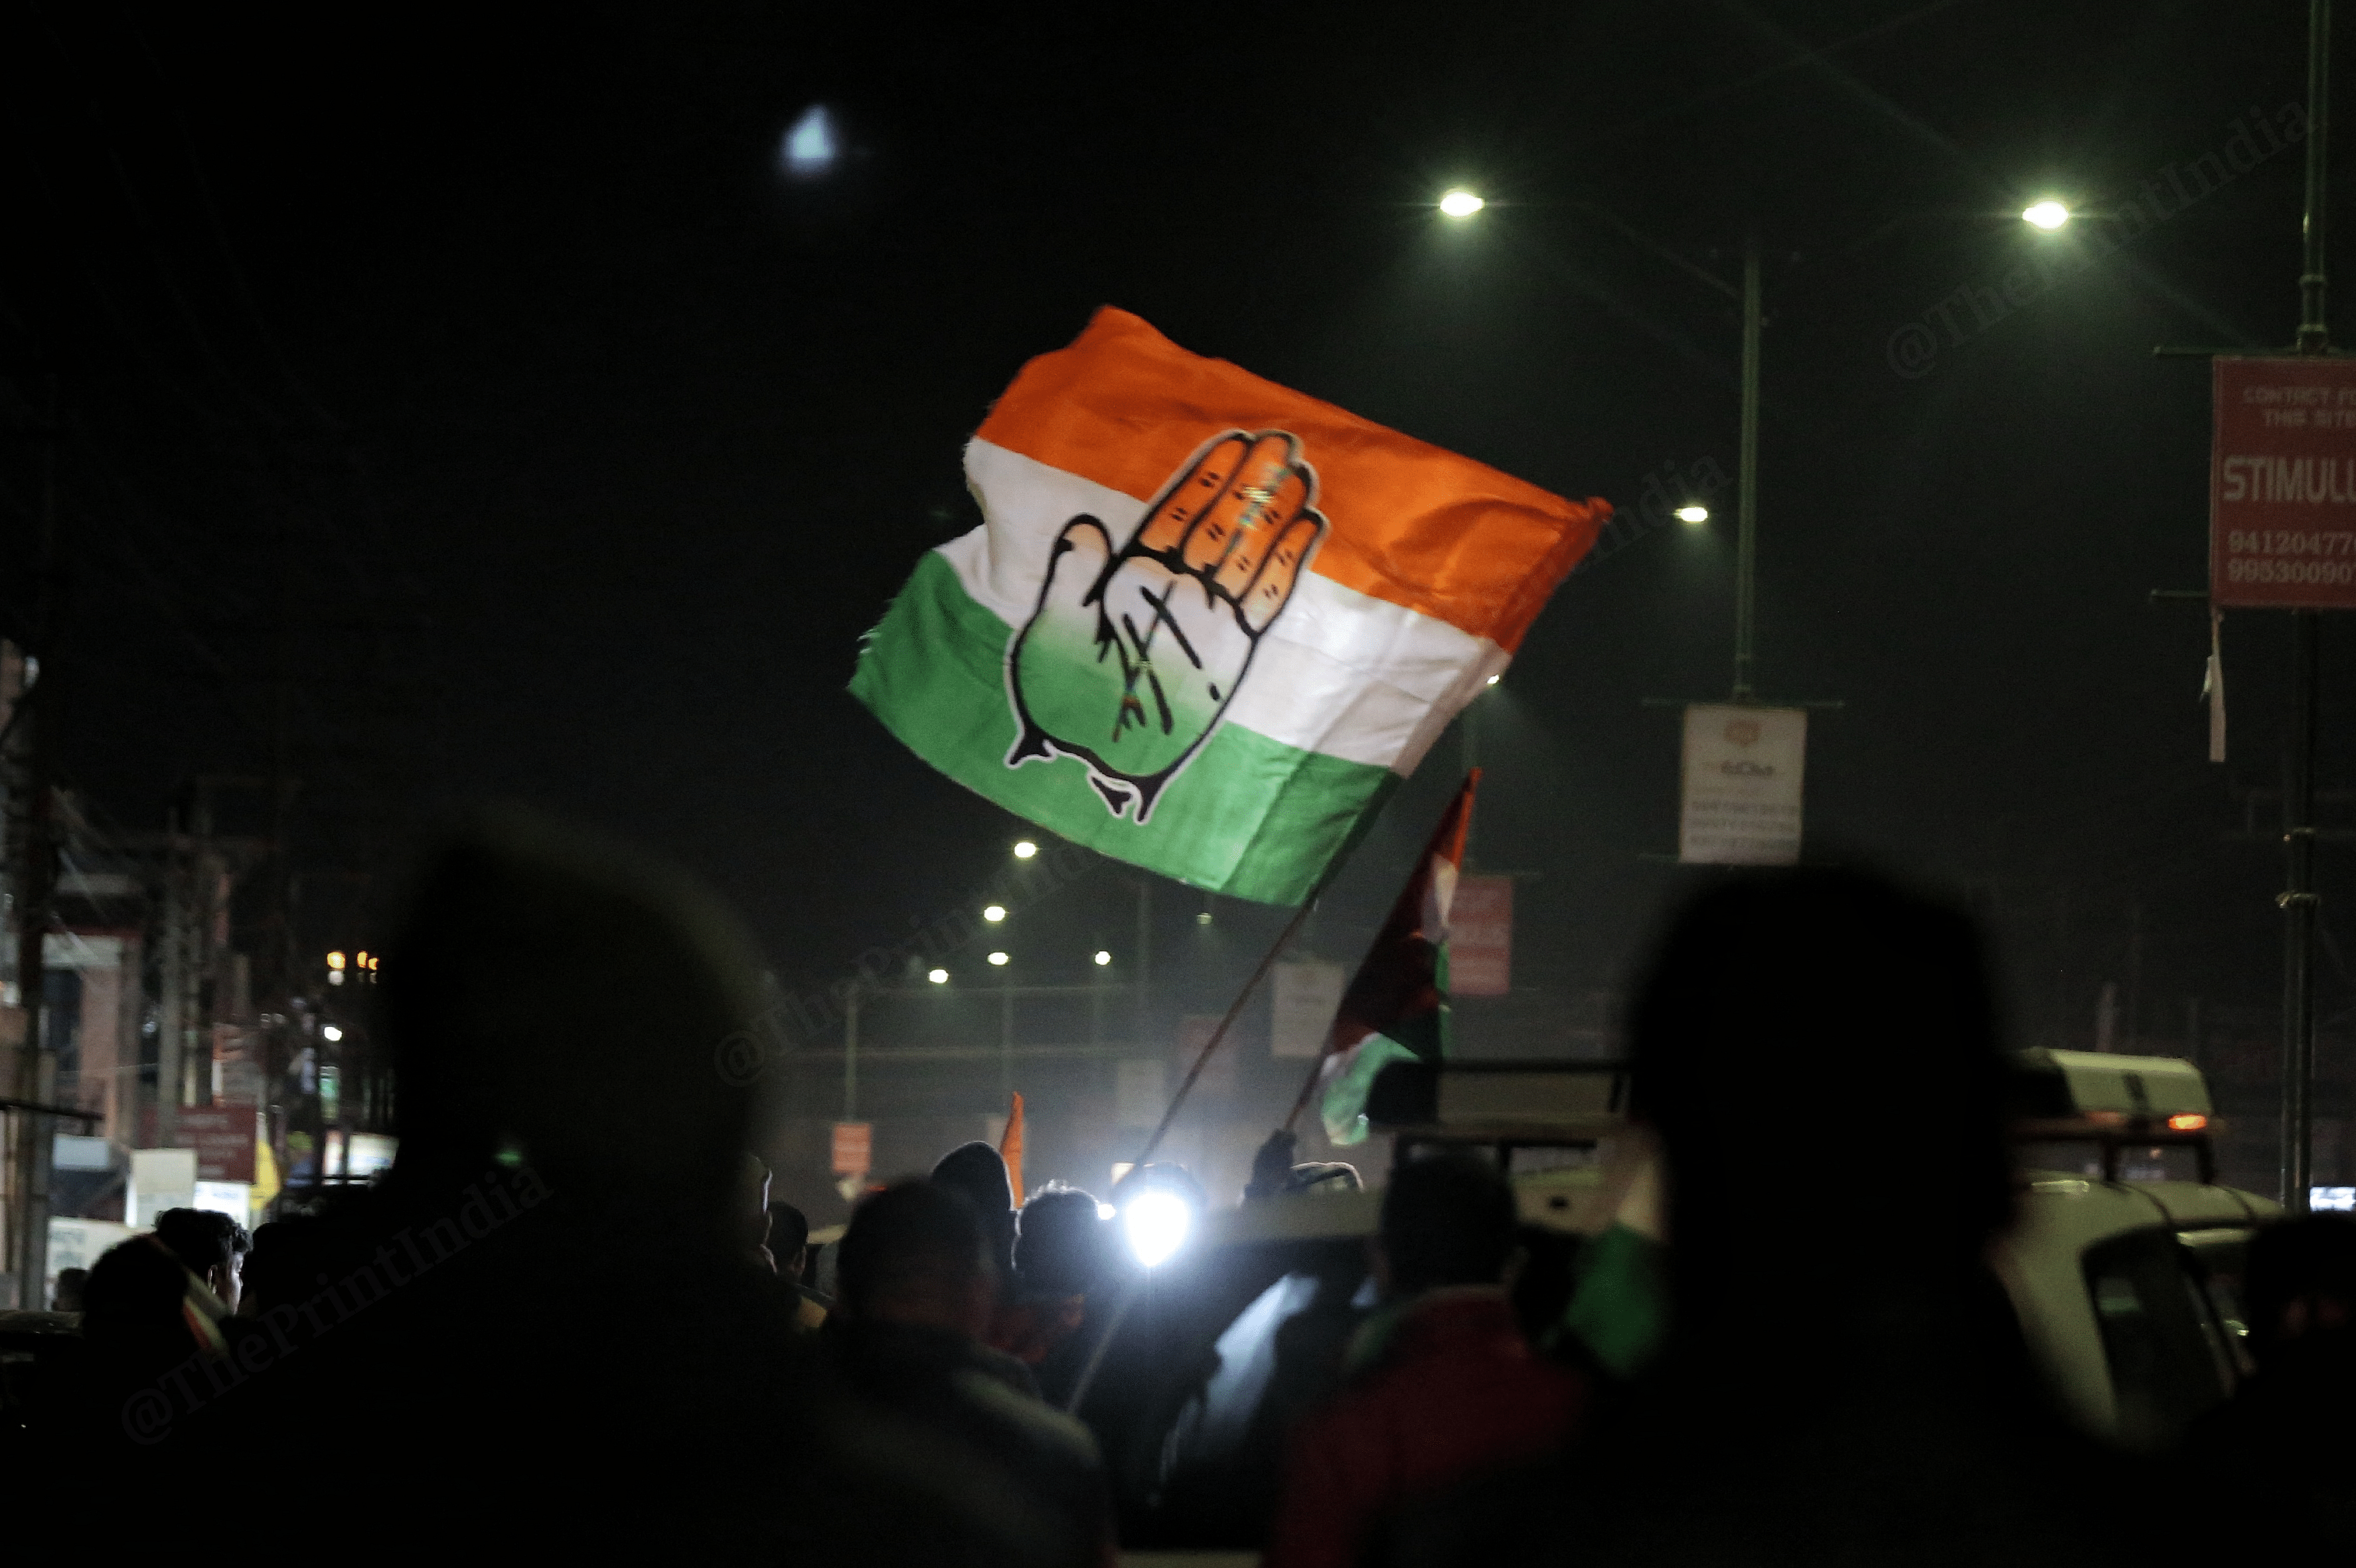 Congress Supporters cheering up with flags during door to door campaign at Doiwala | Photo: Suraj Singh Bisht | ThePrint